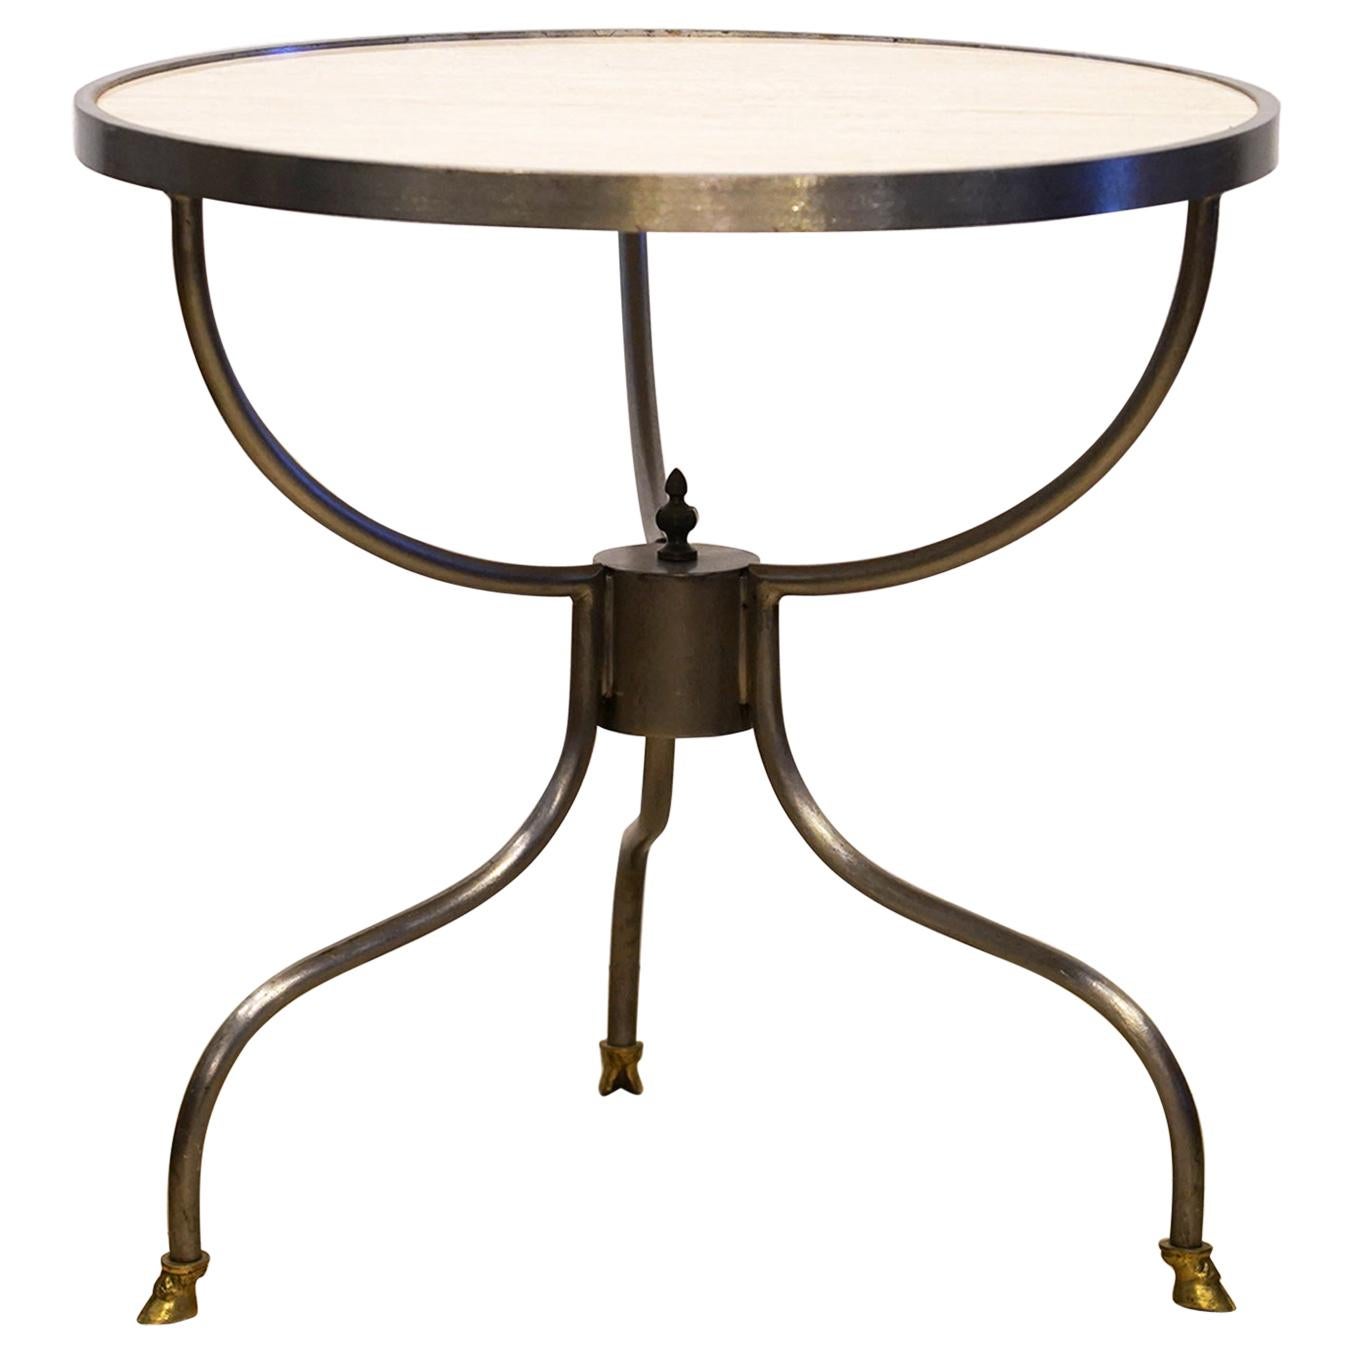 Neoclassical Inspired Round Marble-Top Steel and Brass Mounted Side Table